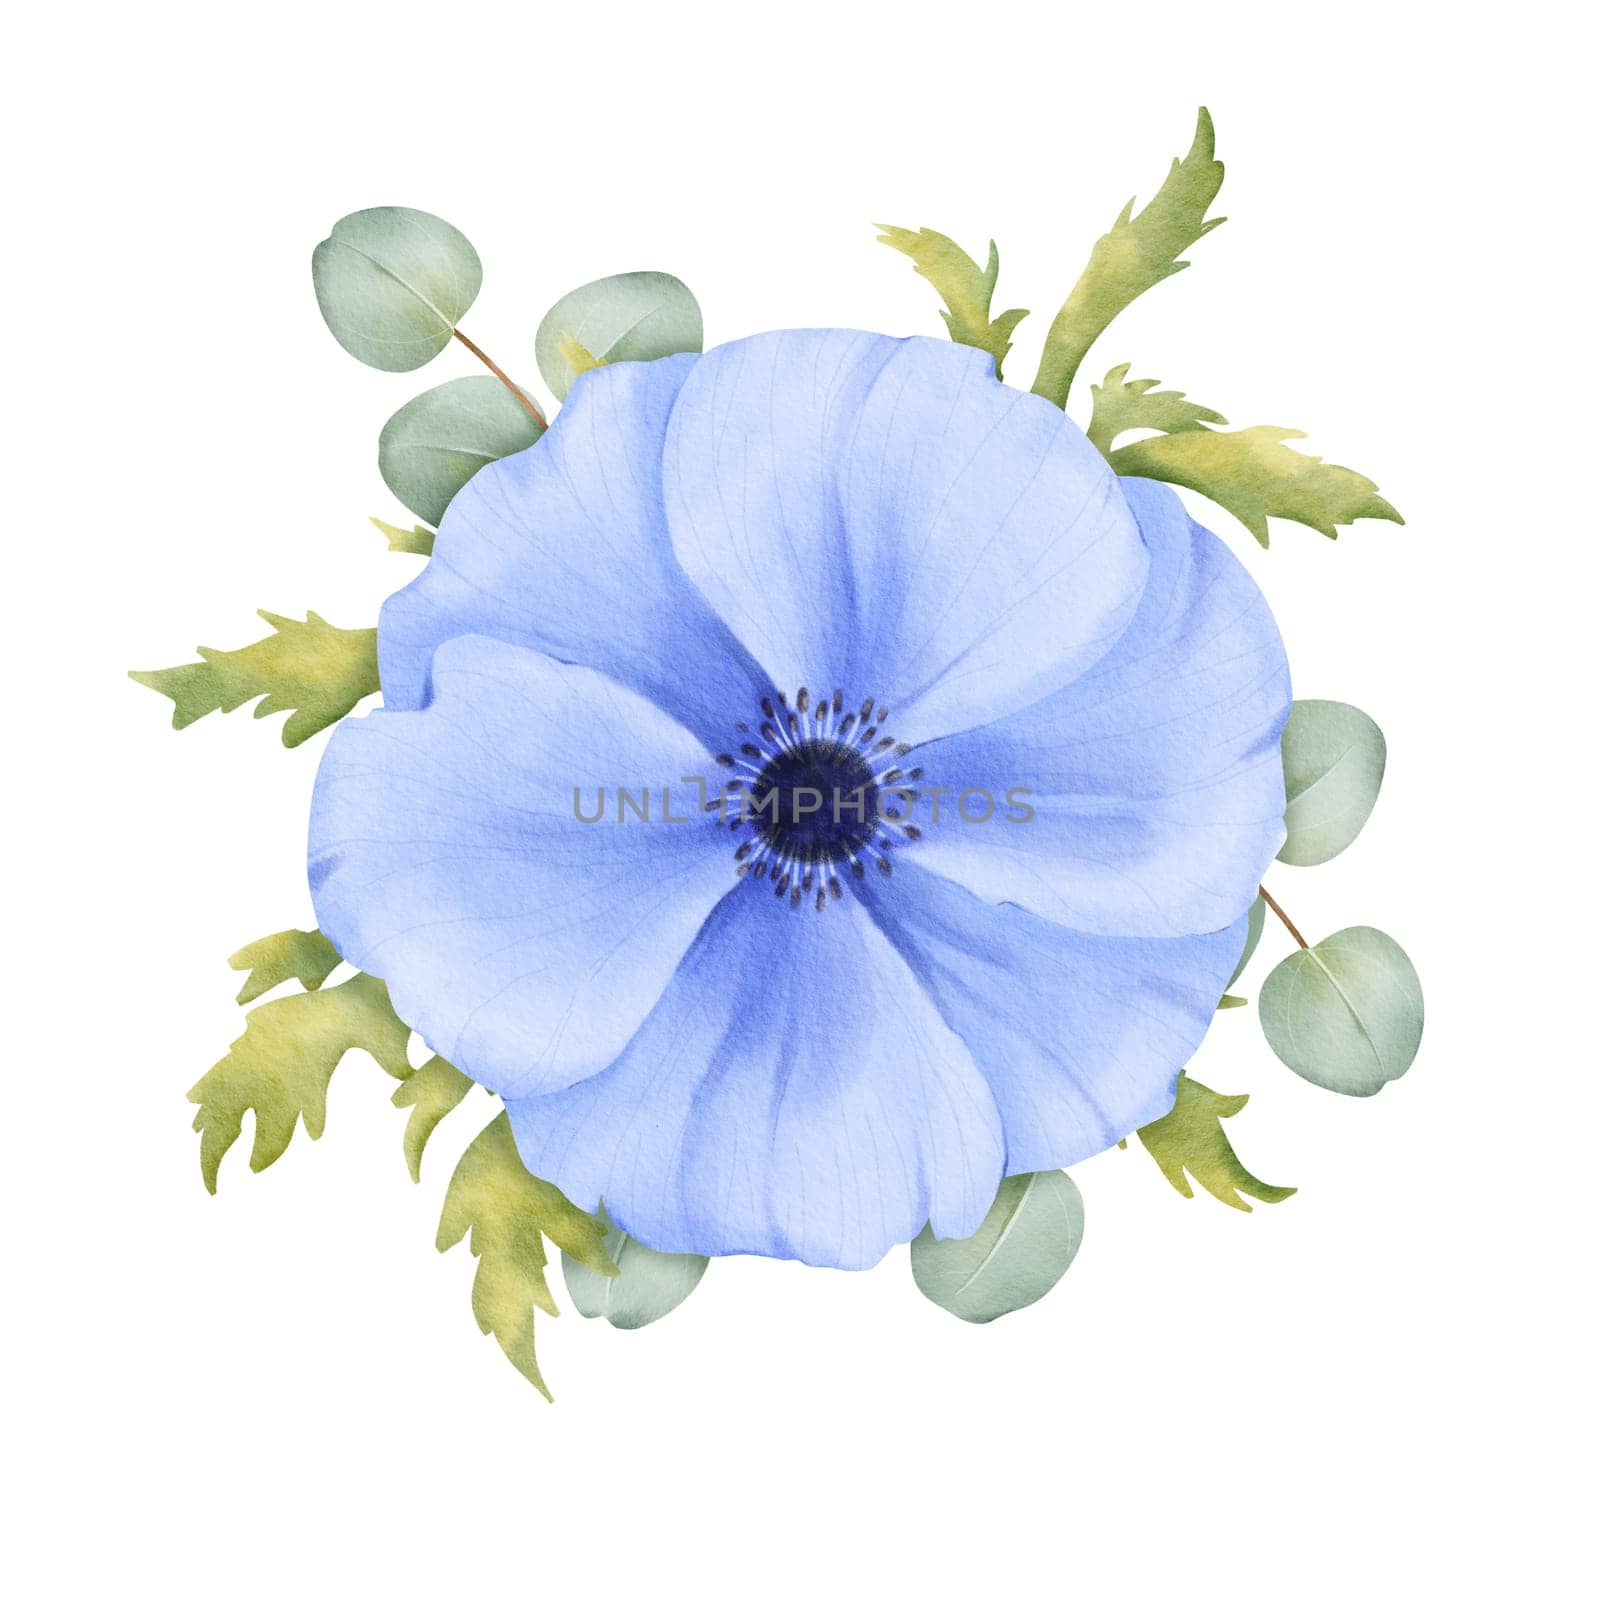 An blue anemone floral arrangement with fresh greenery and eucalyptus leaves. watercolor illustration for event decorations, party invitations, digital branding or product packaging by Art_Mari_Ka